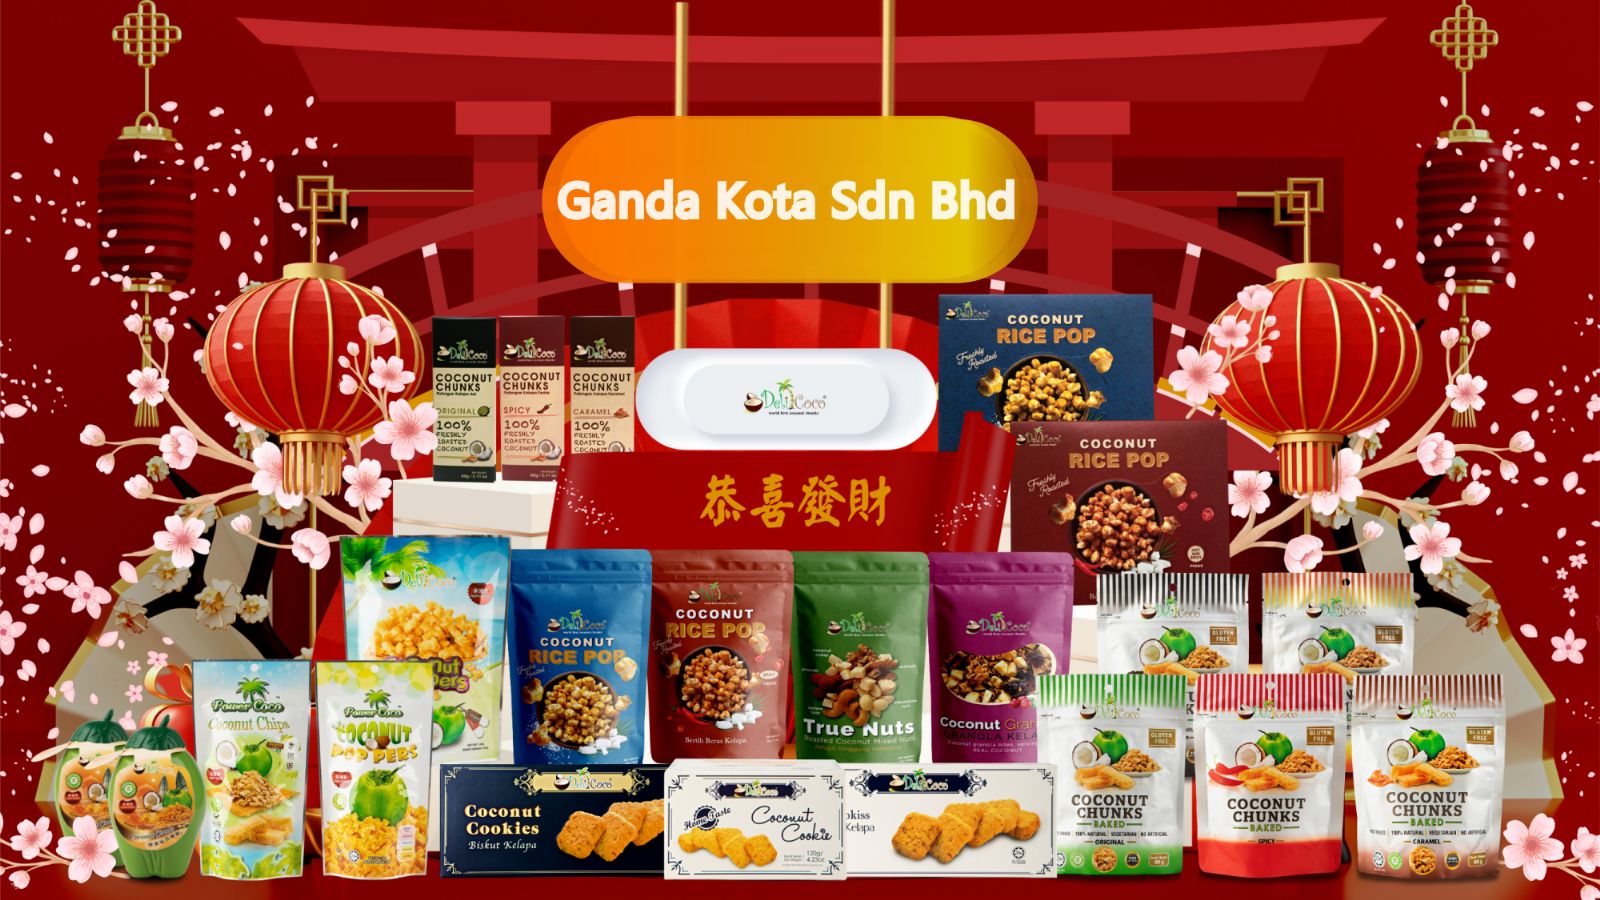 Welcome to Ganda Kota. Happy Chinese New Year in February. We look forward to serving you!